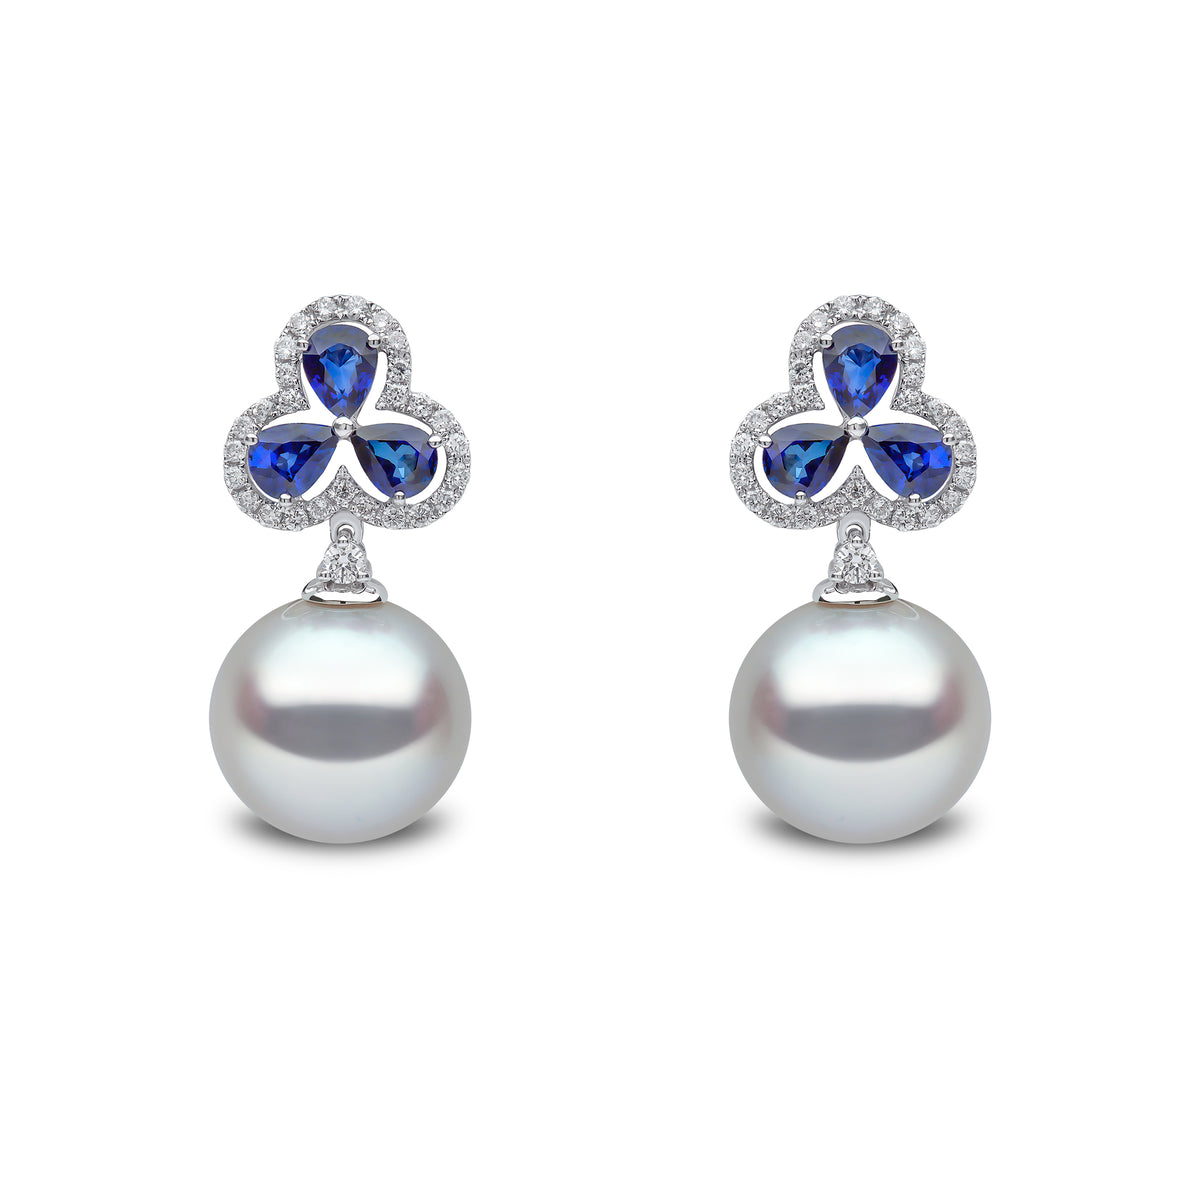 Belgravia South Sea Pearl, Diamond And Sapphire Earrings In 18ct White Gold